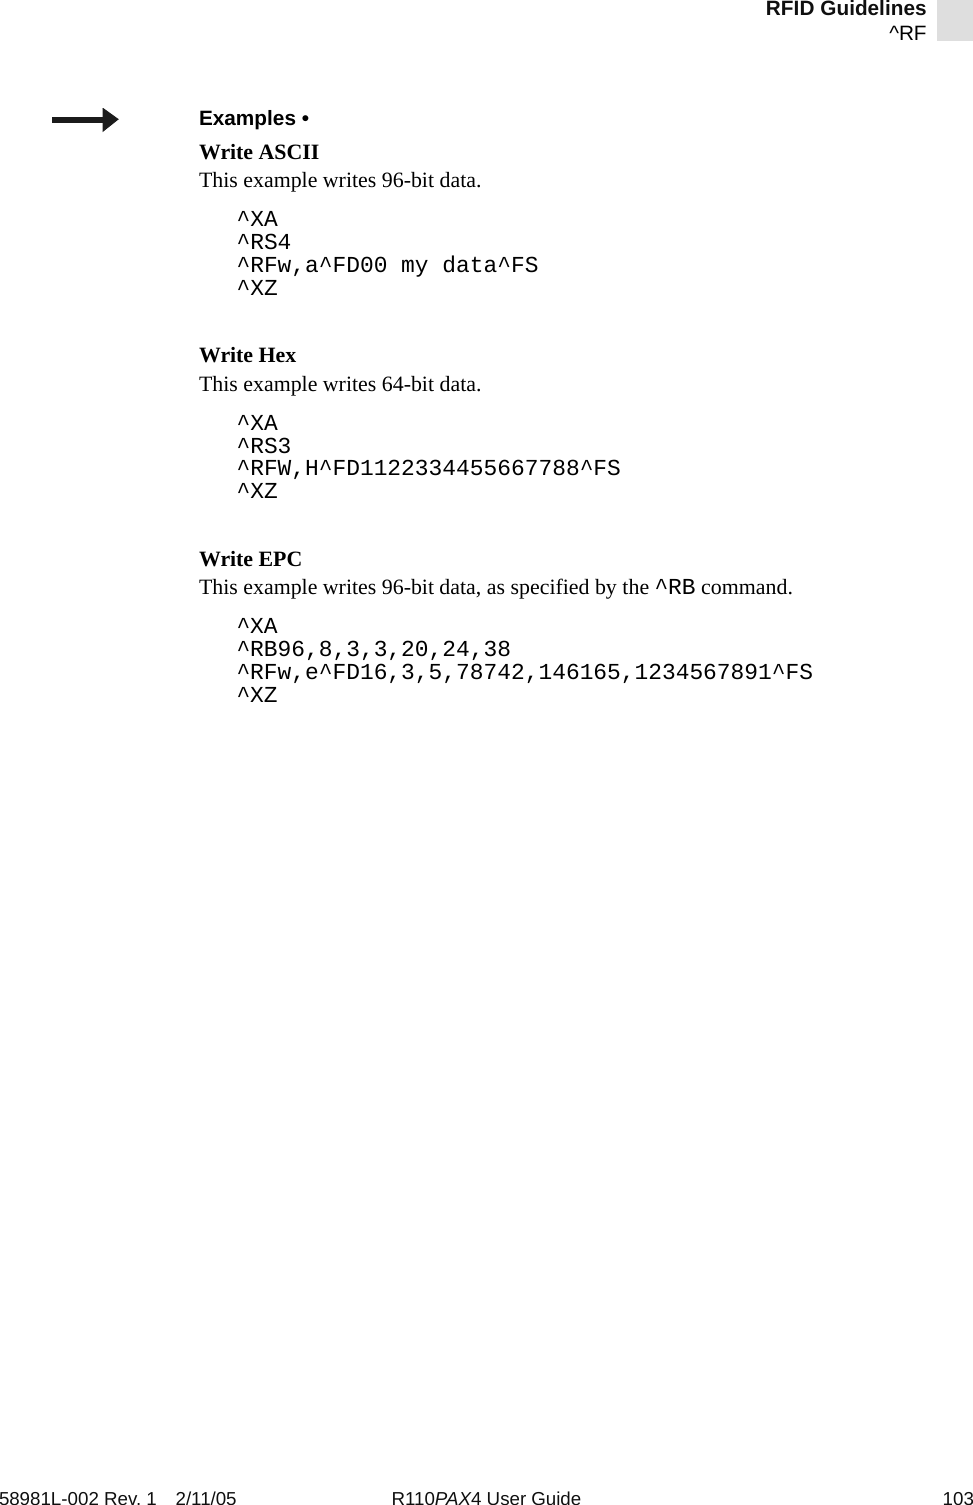 RFID Guidelines^RF58981L-002 Rev. 1 2/11/05 R110PAX4 User Guide 103Examples • Write ASCIIThis example writes 96-bit data.^XA^RS4^RFw,a^FD00 my data^FS^XZWrite HexThis example writes 64-bit data.^XA^RS3^RFW,H^FD1122334455667788^FS^XZWrite EPC This example writes 96-bit data, as specified by the ^RB command.^XA^RB96,8,3,3,20,24,38^RFw,e^FD16,3,5,78742,146165,1234567891^FS^XZ